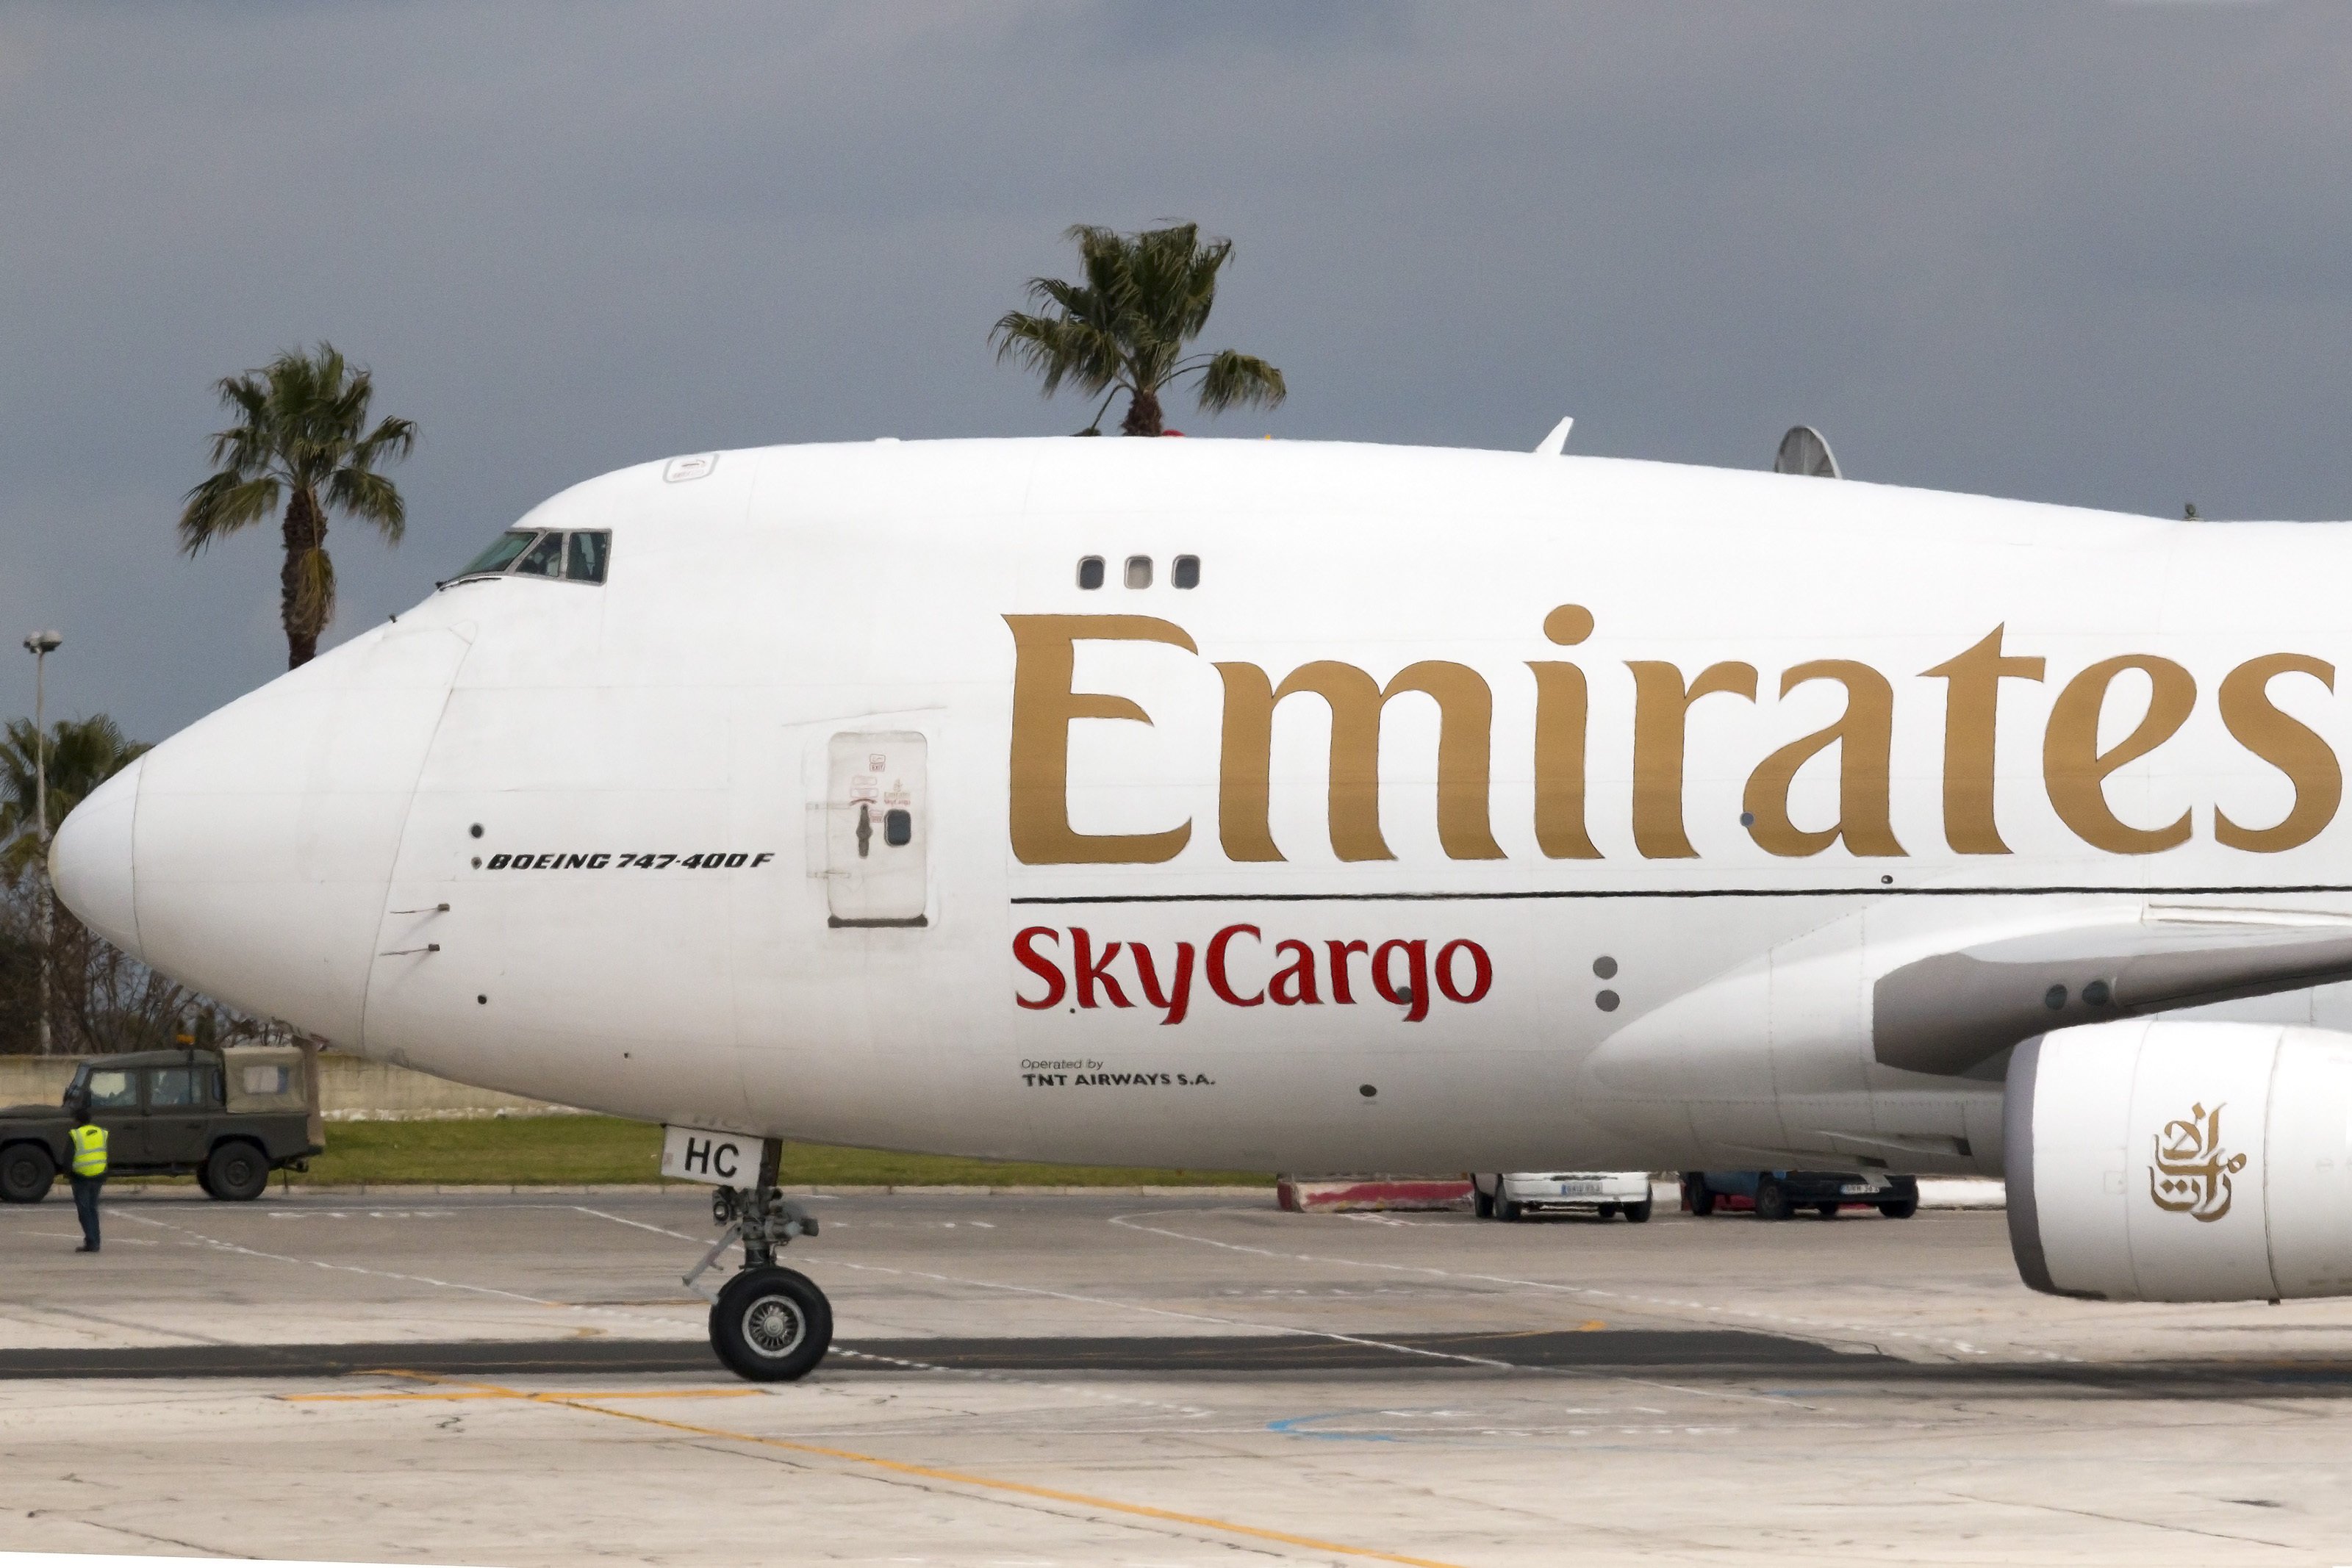 Emirates SkyCargo also aims to add 15 aircraft over the next five years to current fleet. Photo: Shutterstock